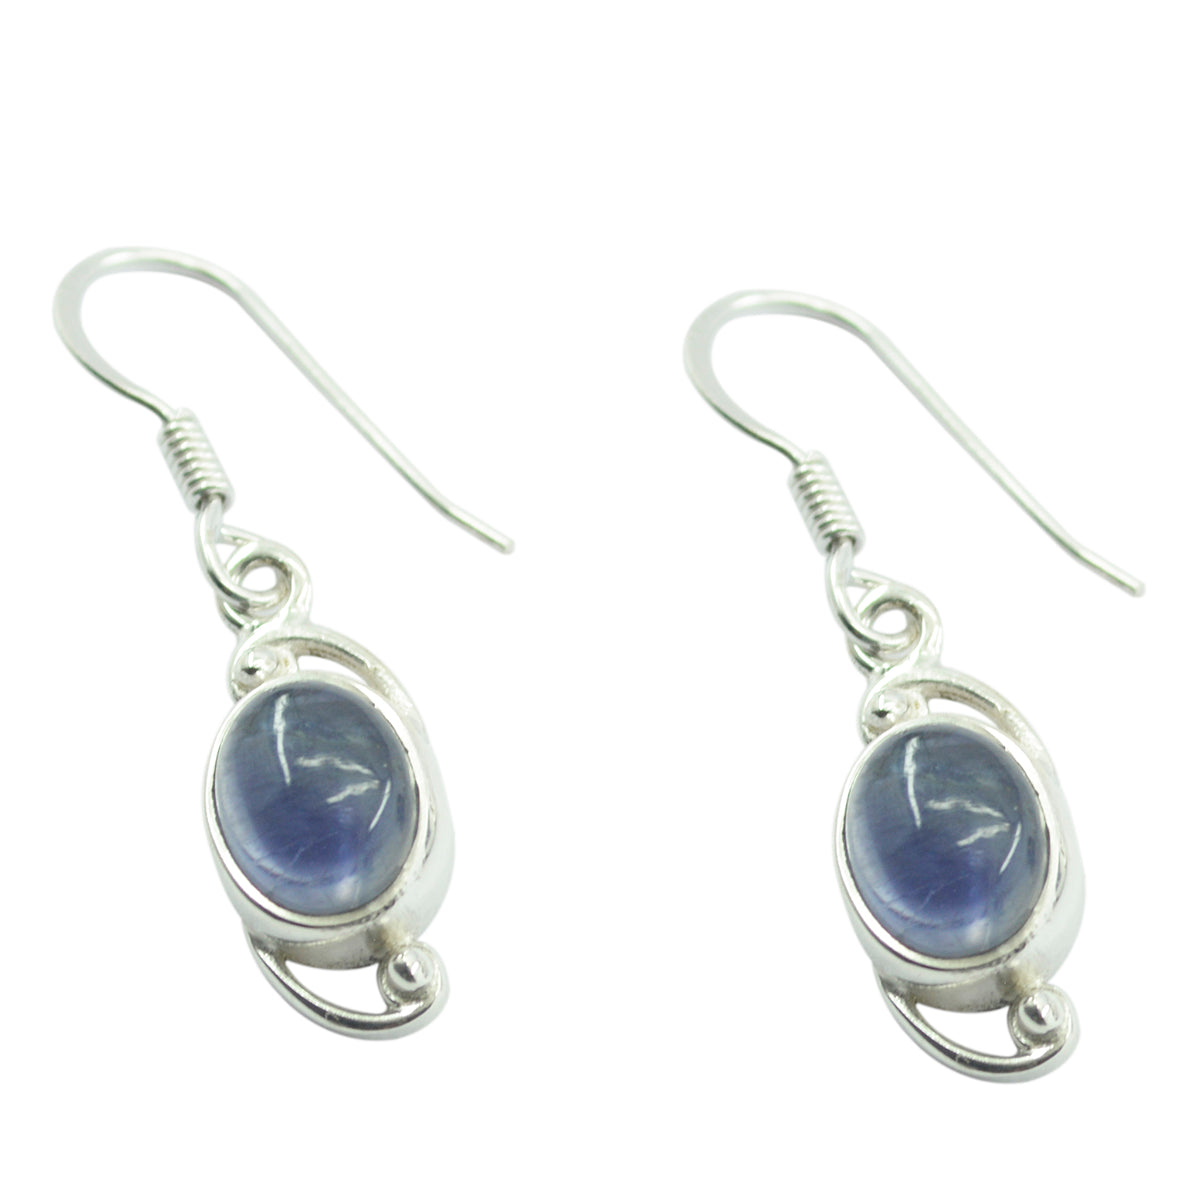 Riyo Good Gemstones oval Cabochon Nevy Blue Iolite Silver Earrings gift for labour day